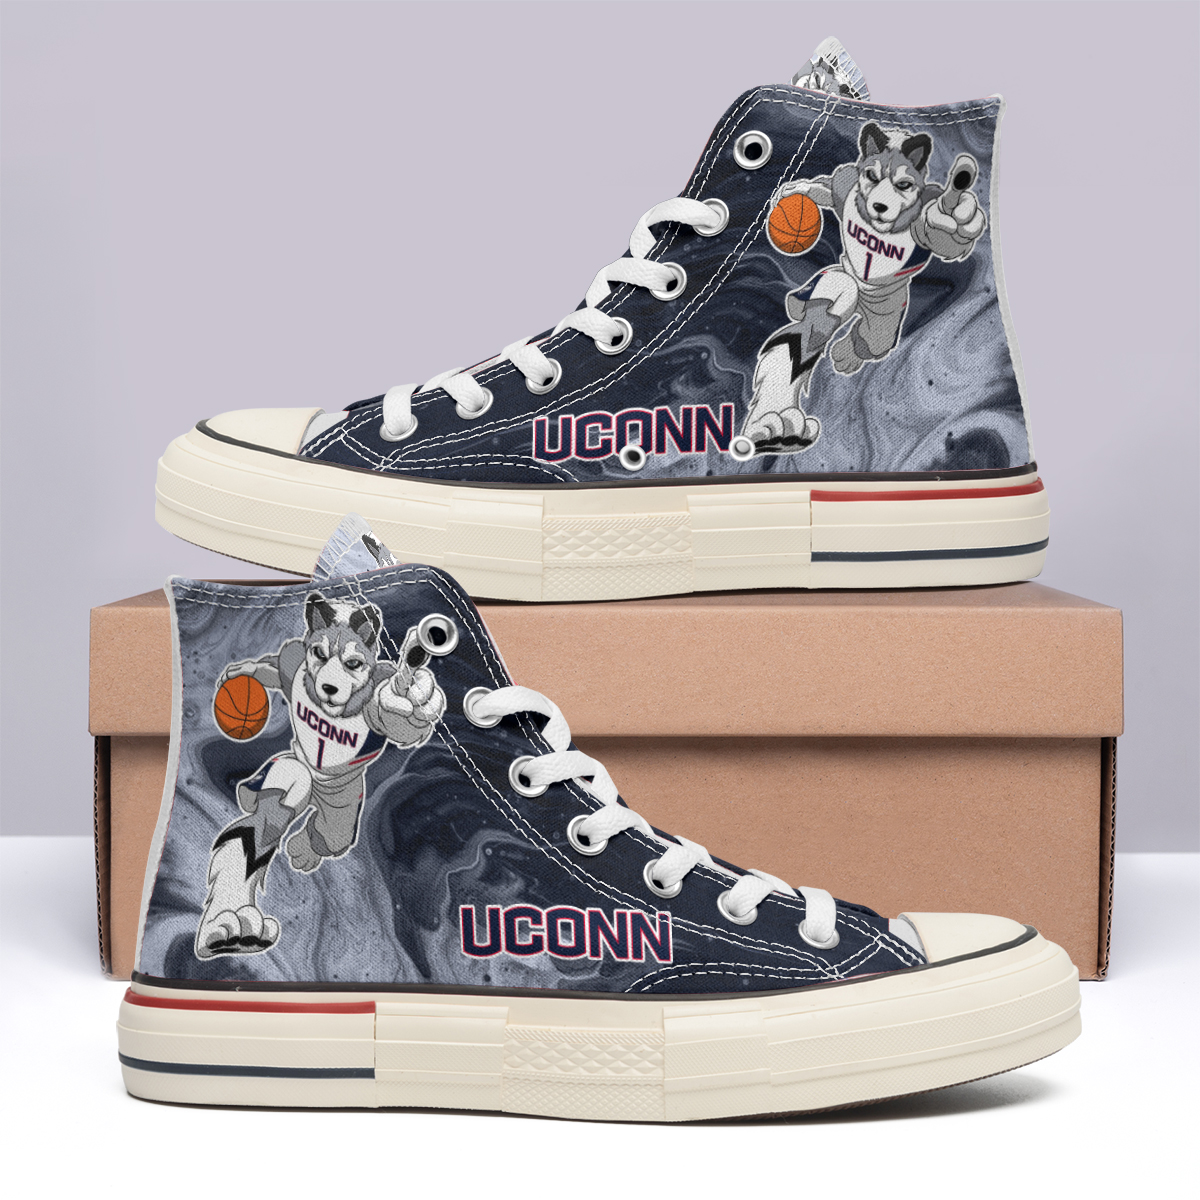 Blondie Band High Top Canvas Shoes Special Edition